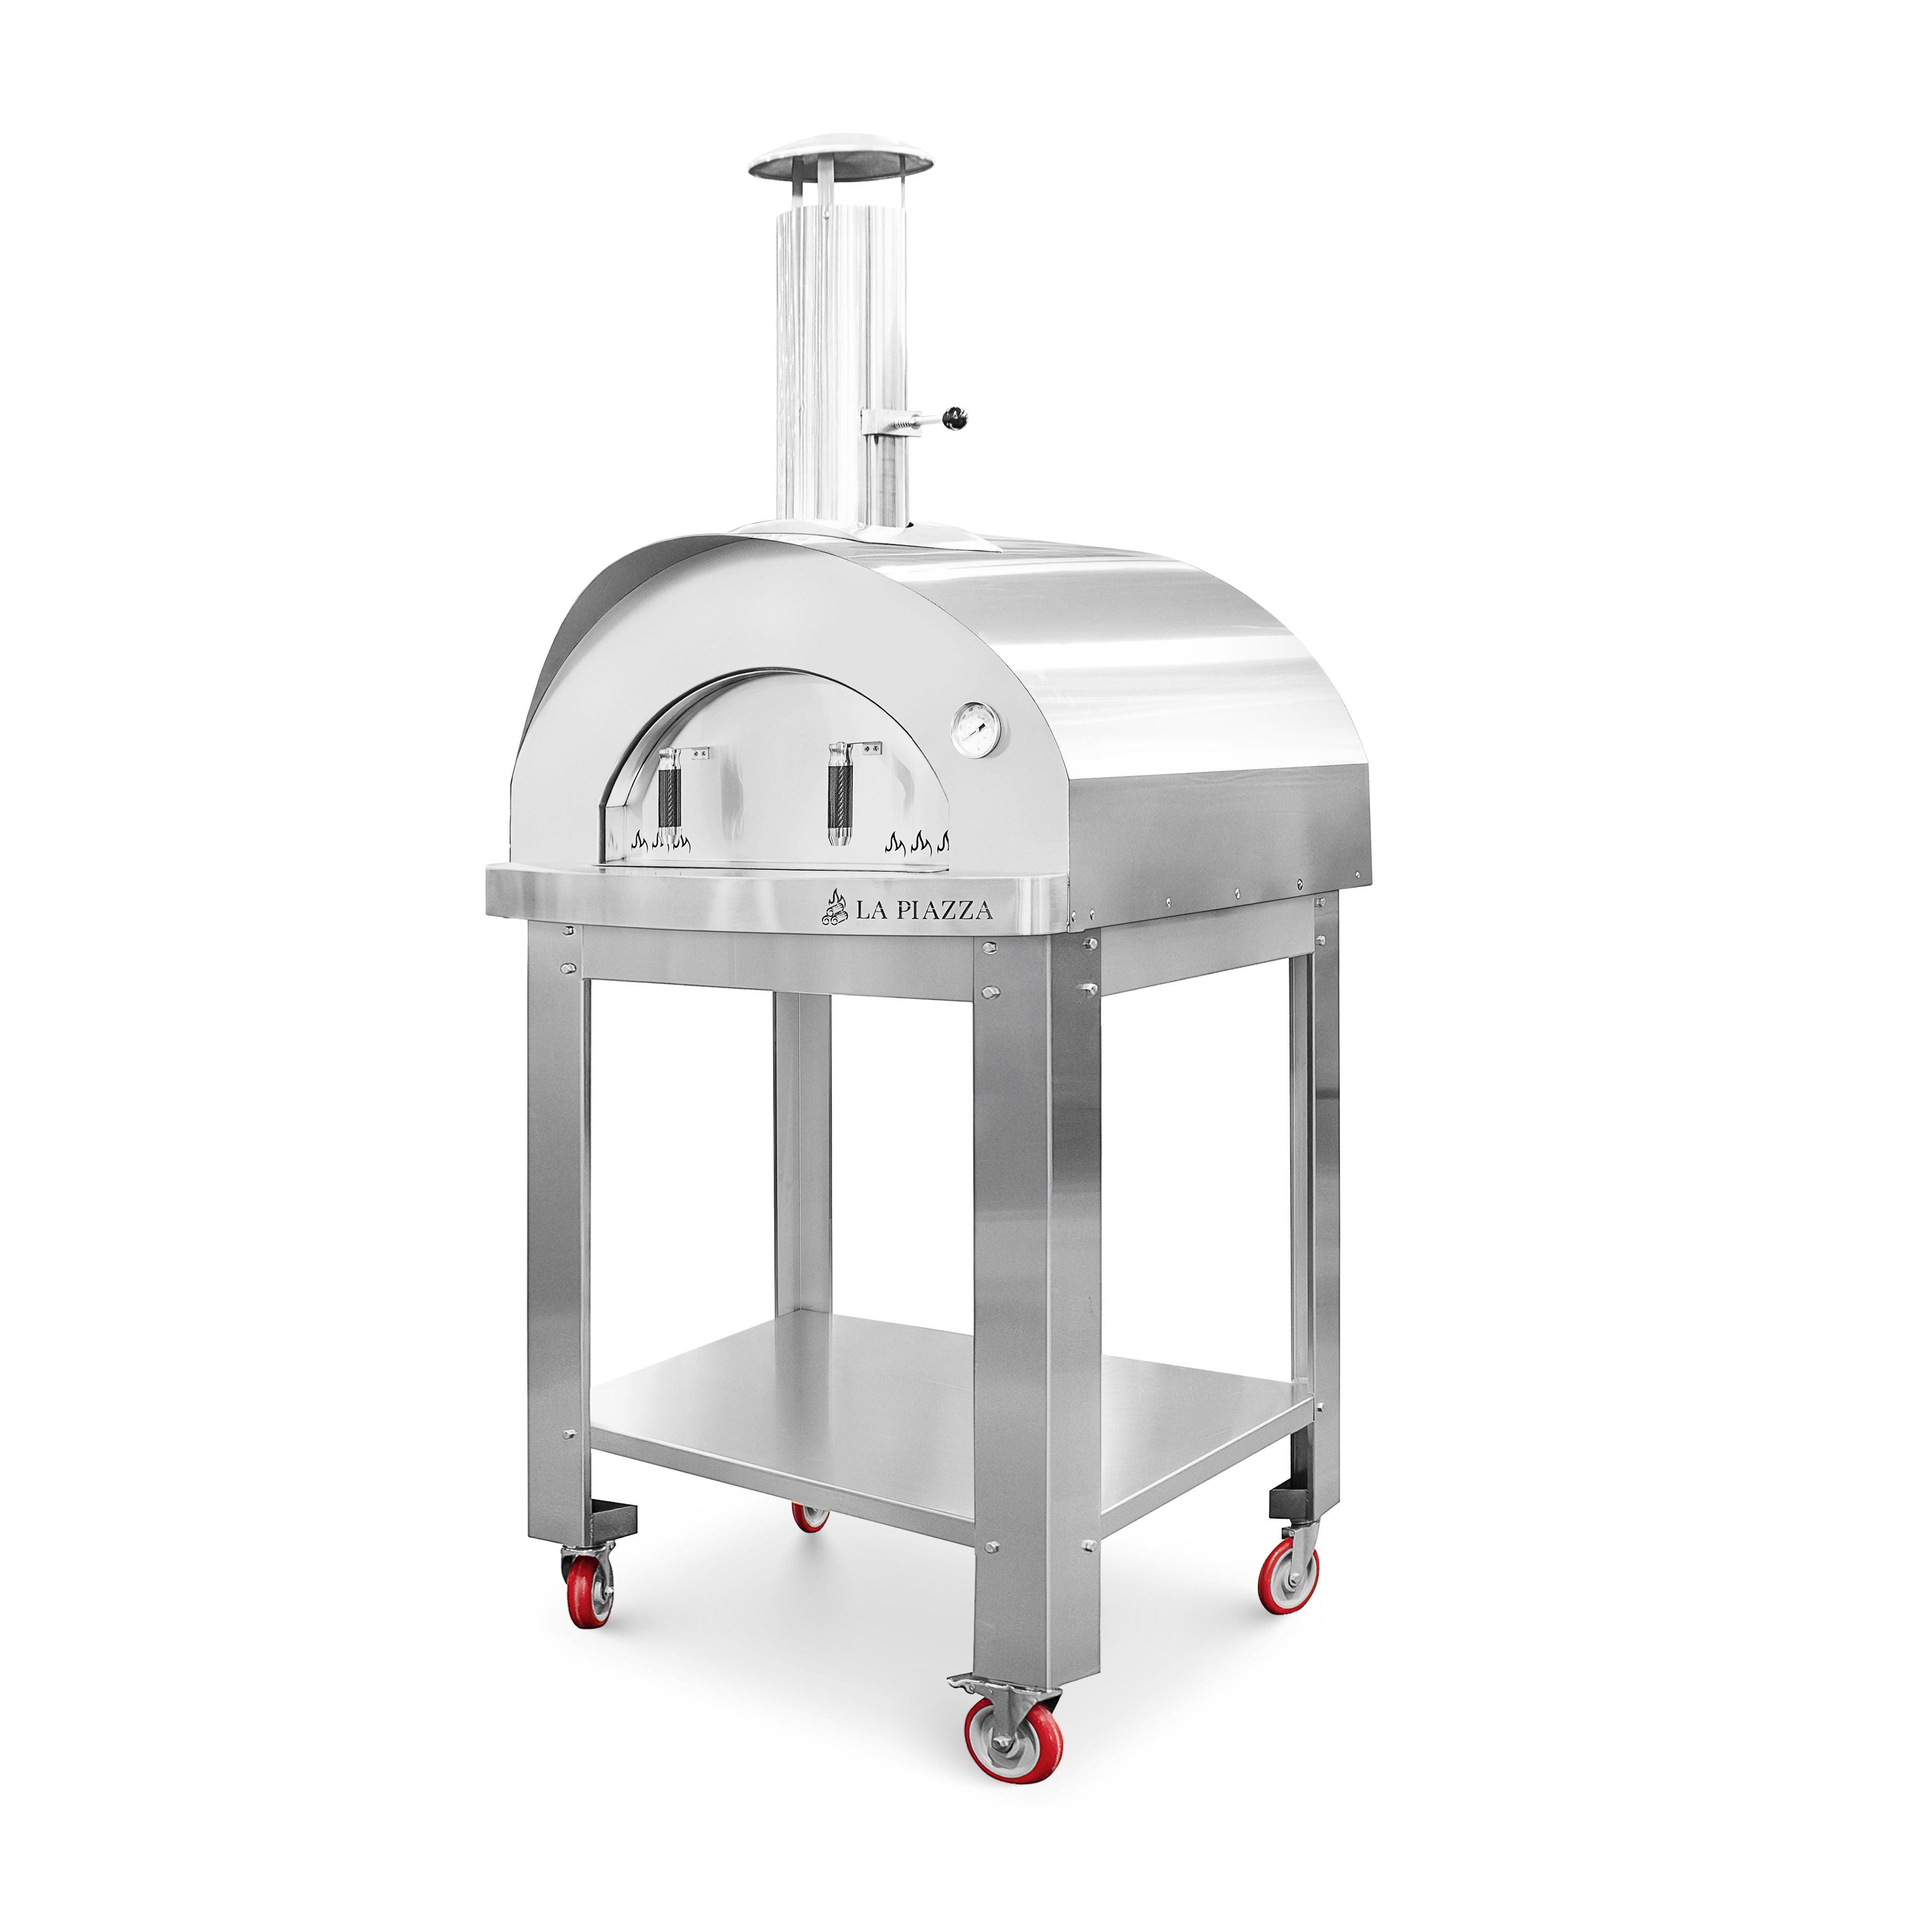 Toscana Wood Oven with Stainless Steel Base - Stainless Steel